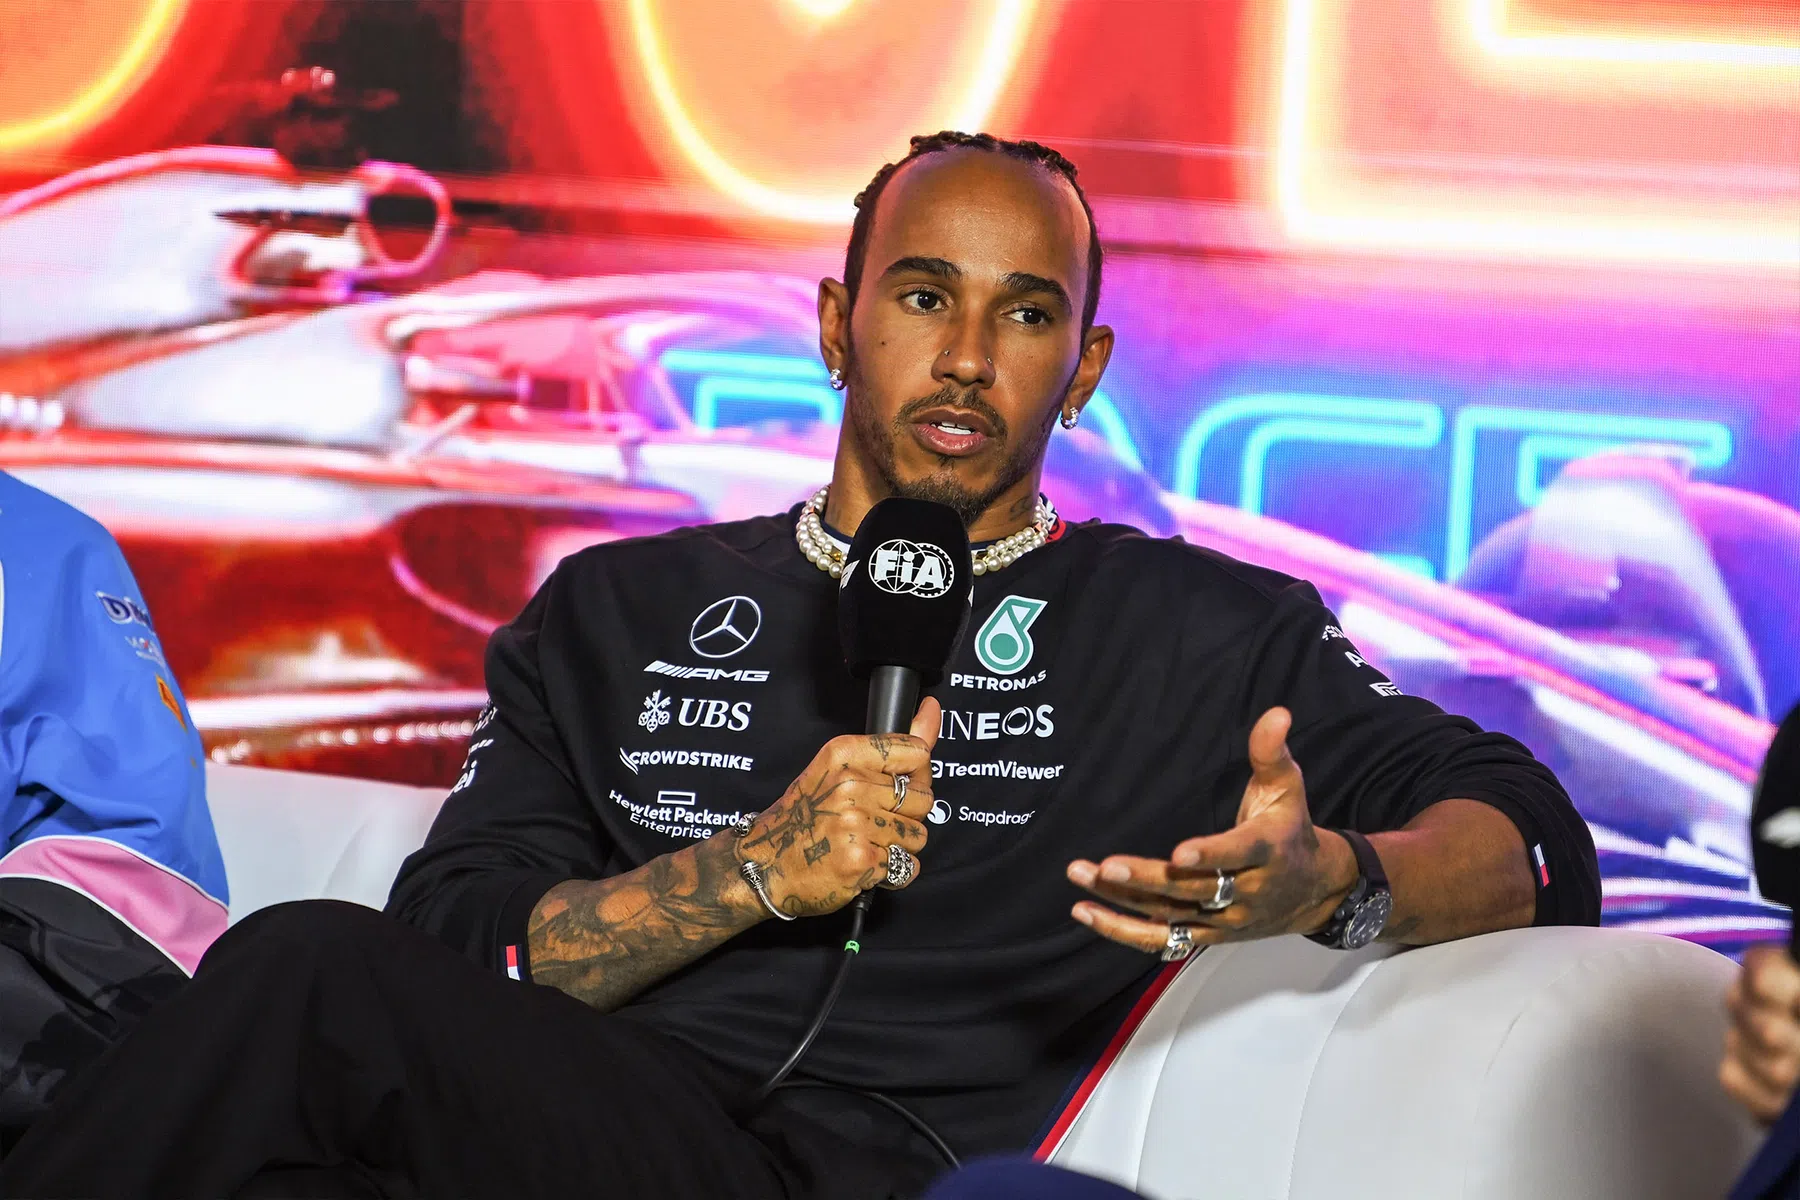 Lewis hamilton talks about his vision for F1, hopes for race in Africa